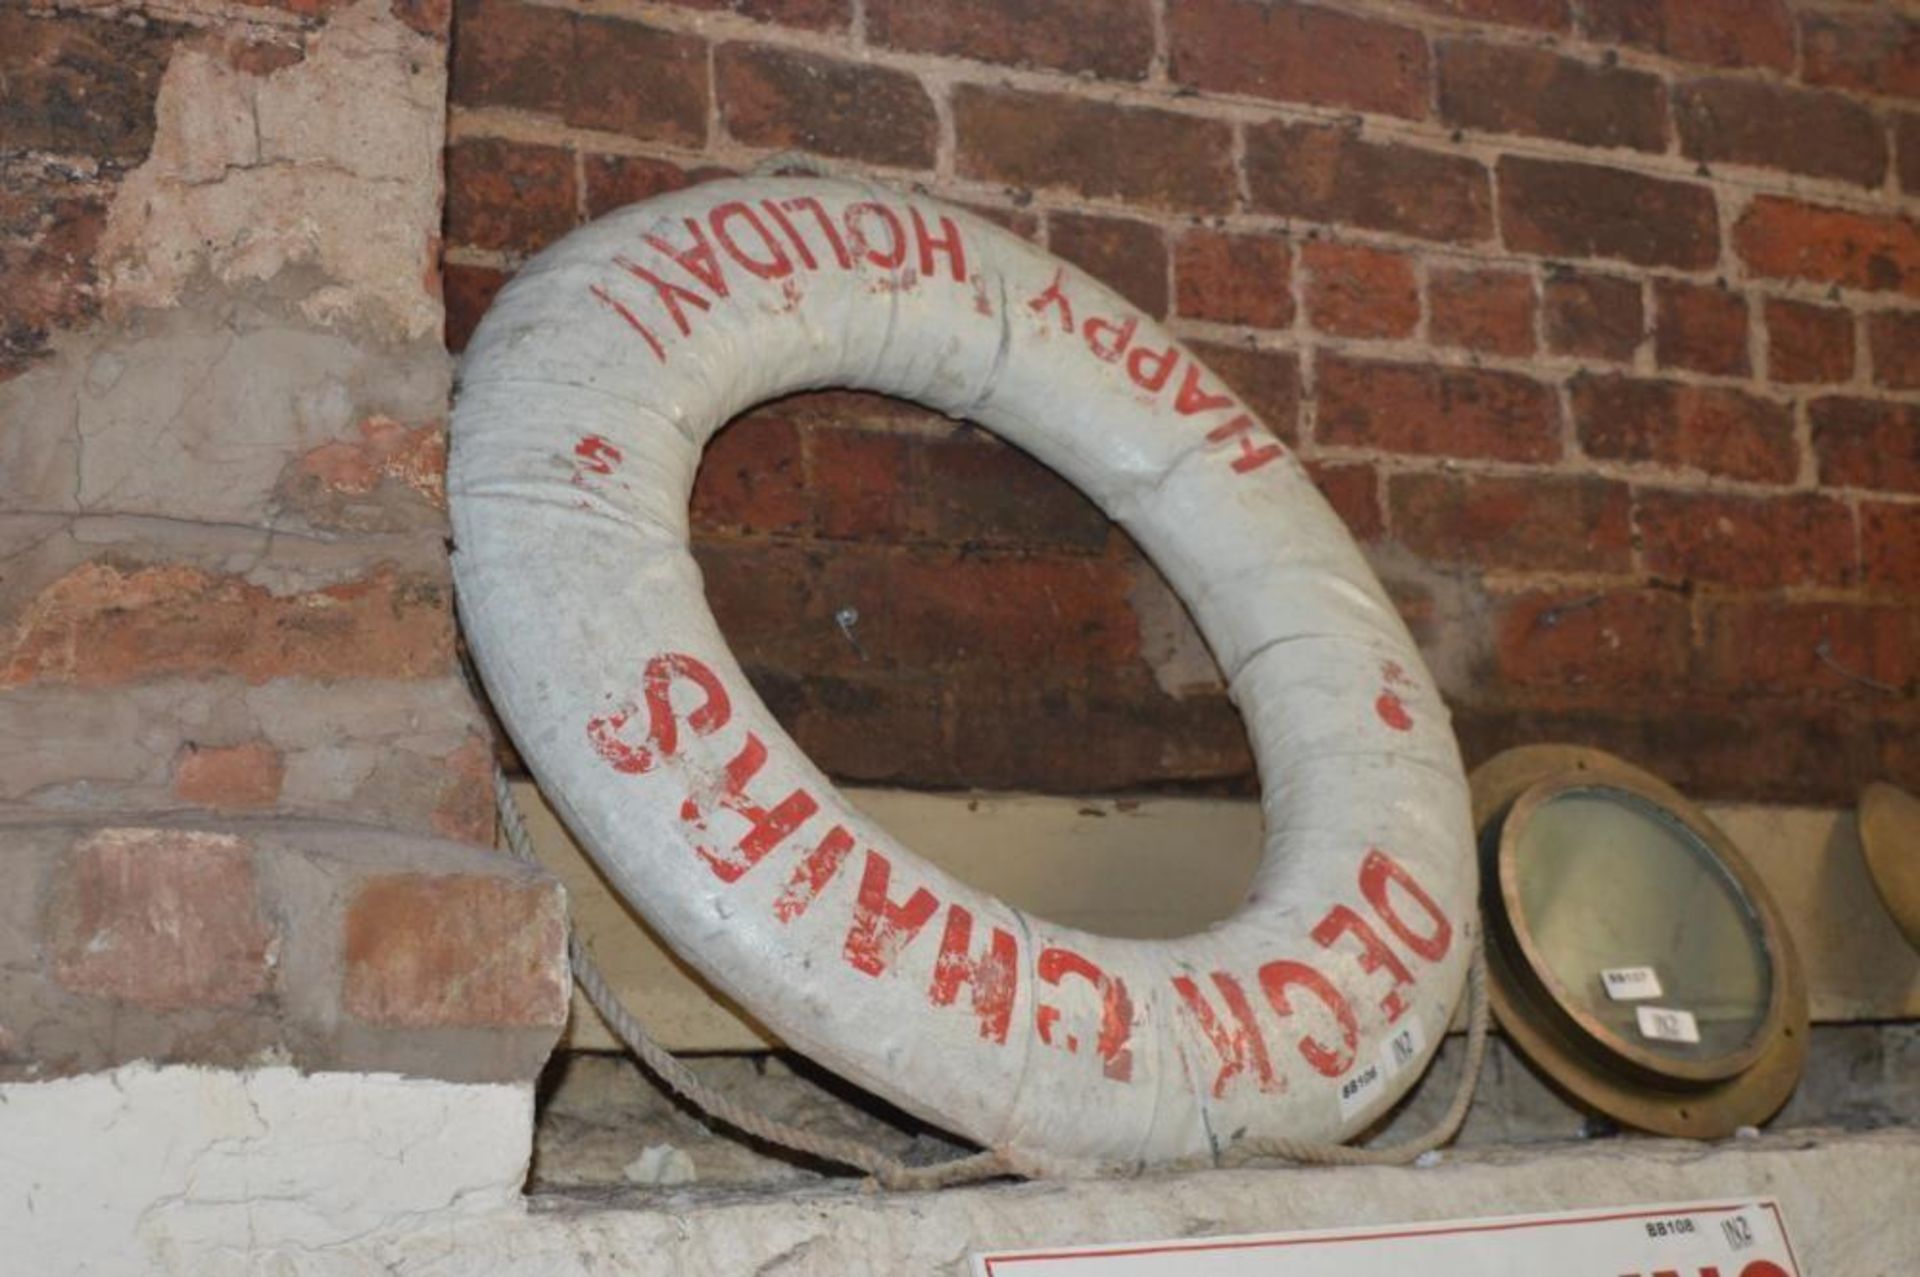 1 x Vintage Happy Holidays Deck Chairs Life Saving Buoy Ring - Ref BB106 SF - CL351 - Location: Chor - Image 3 of 5